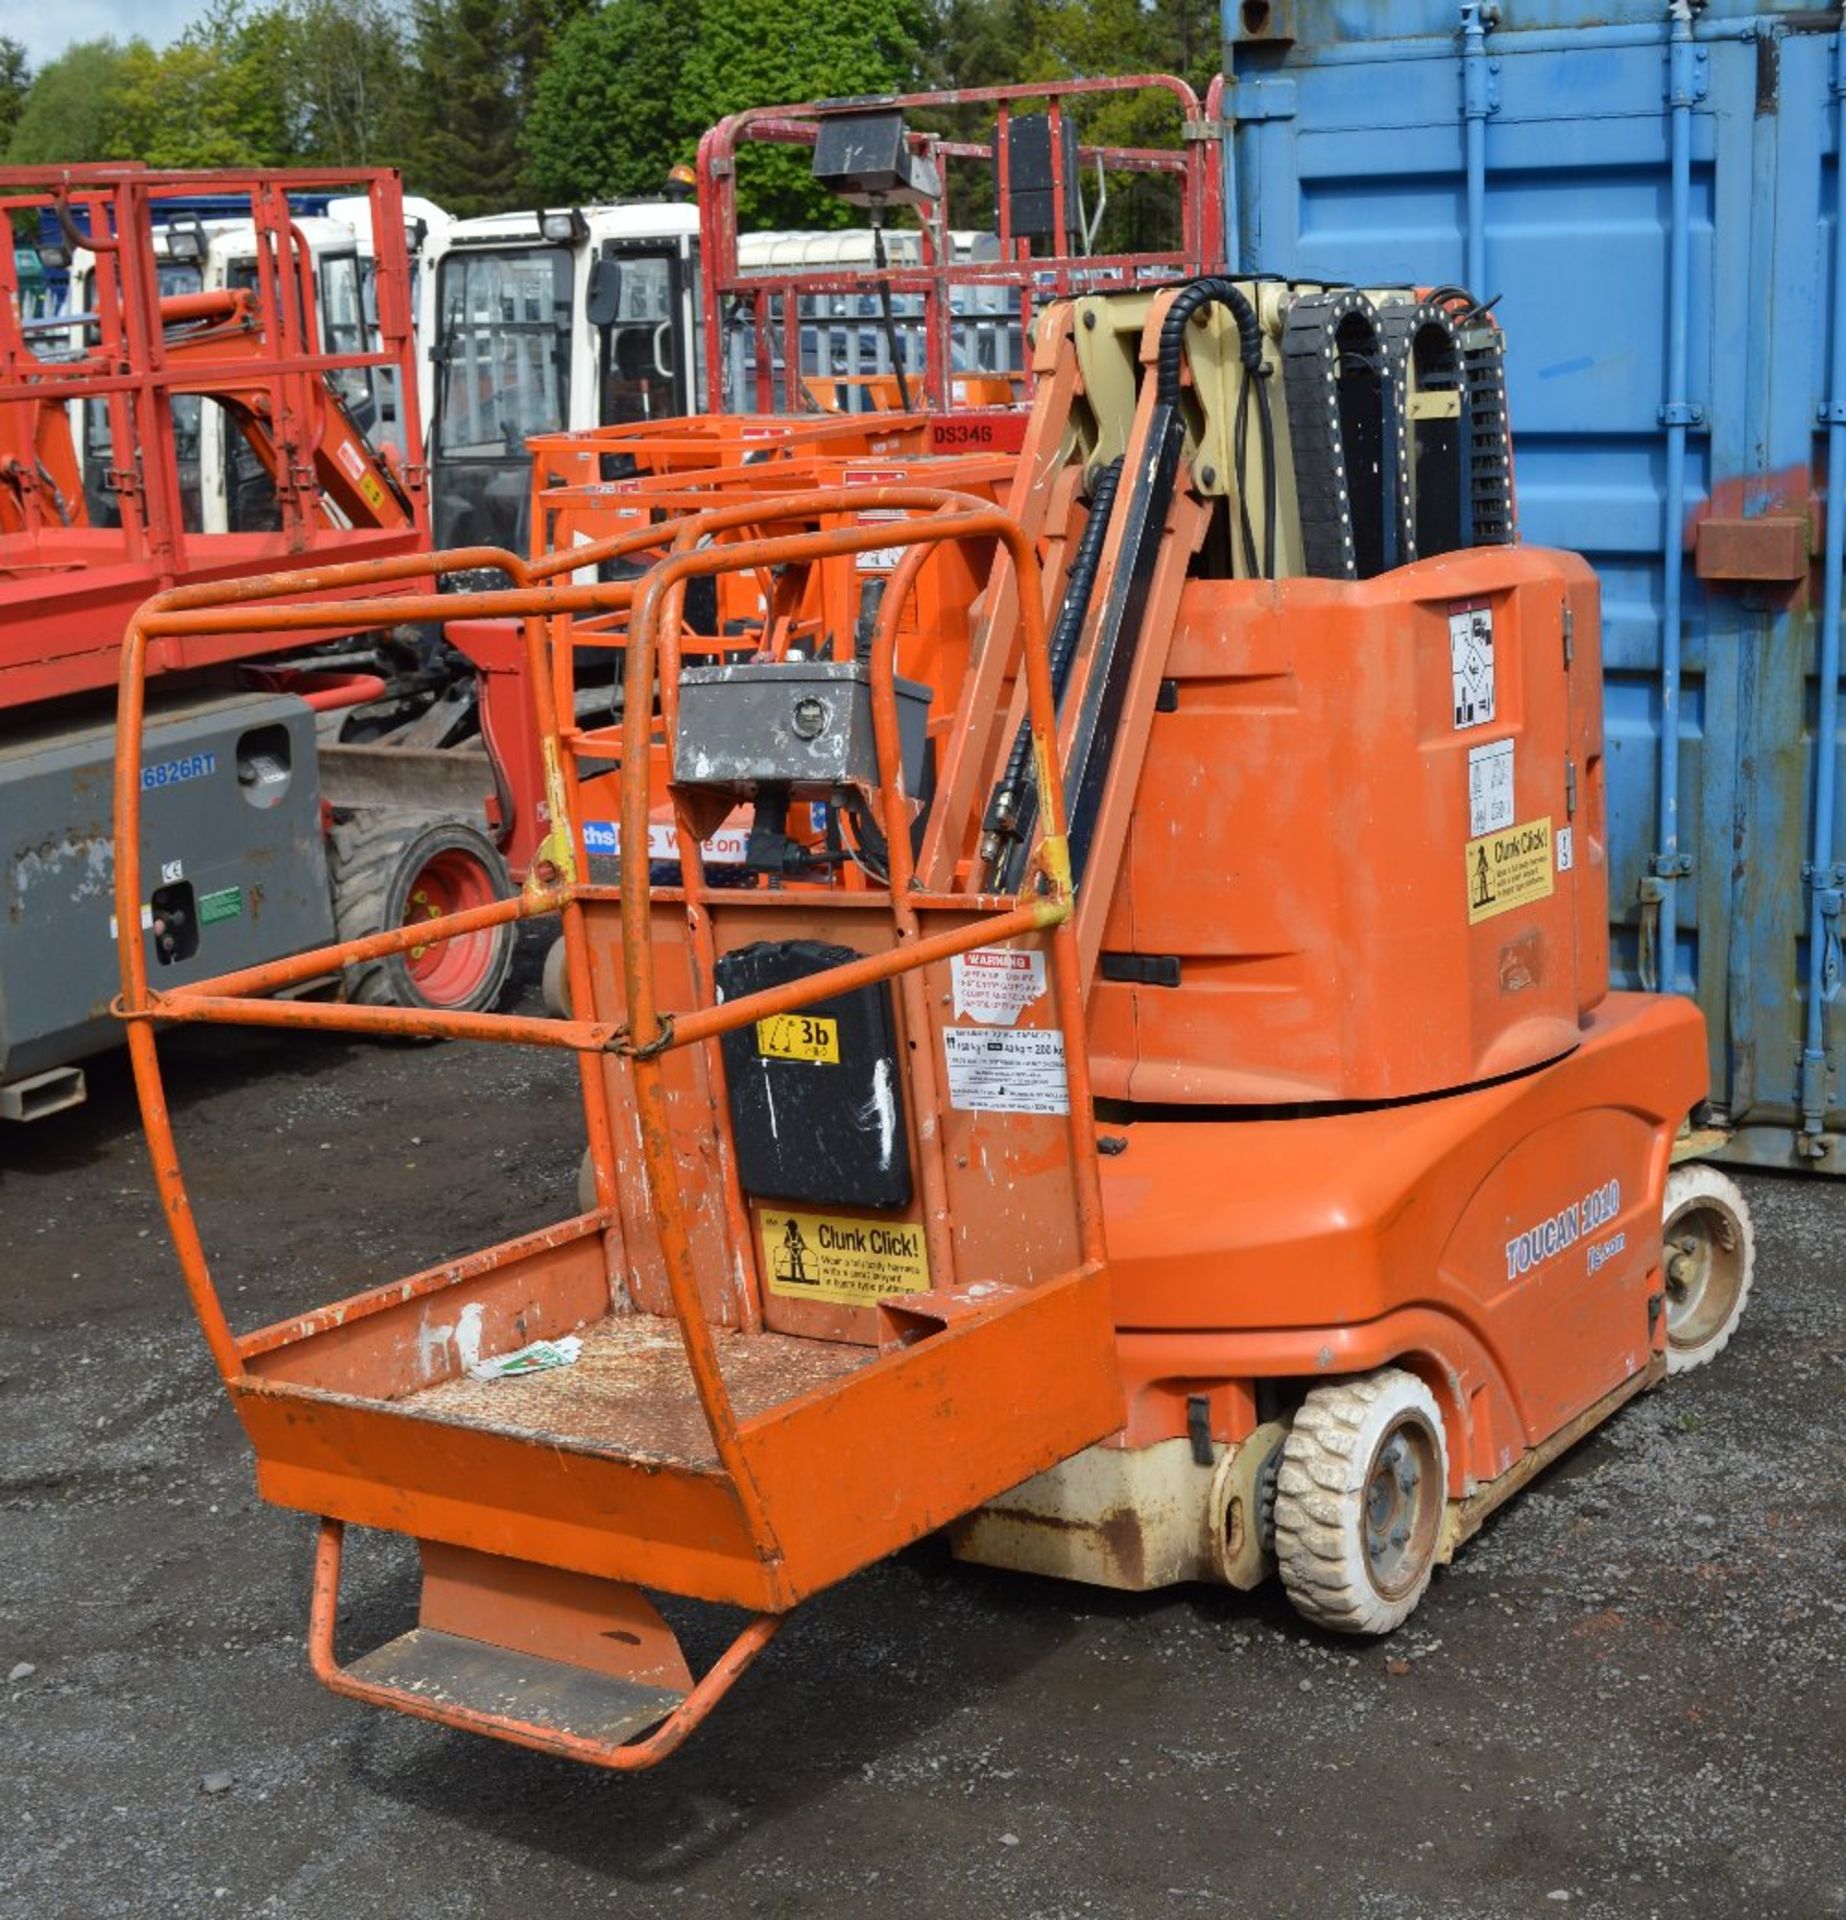 JLG Toucan 1010 8 metre electric boom lift
Year: 2006
S/N: 12548
Recorded hours: 316
A413540 - Image 2 of 2